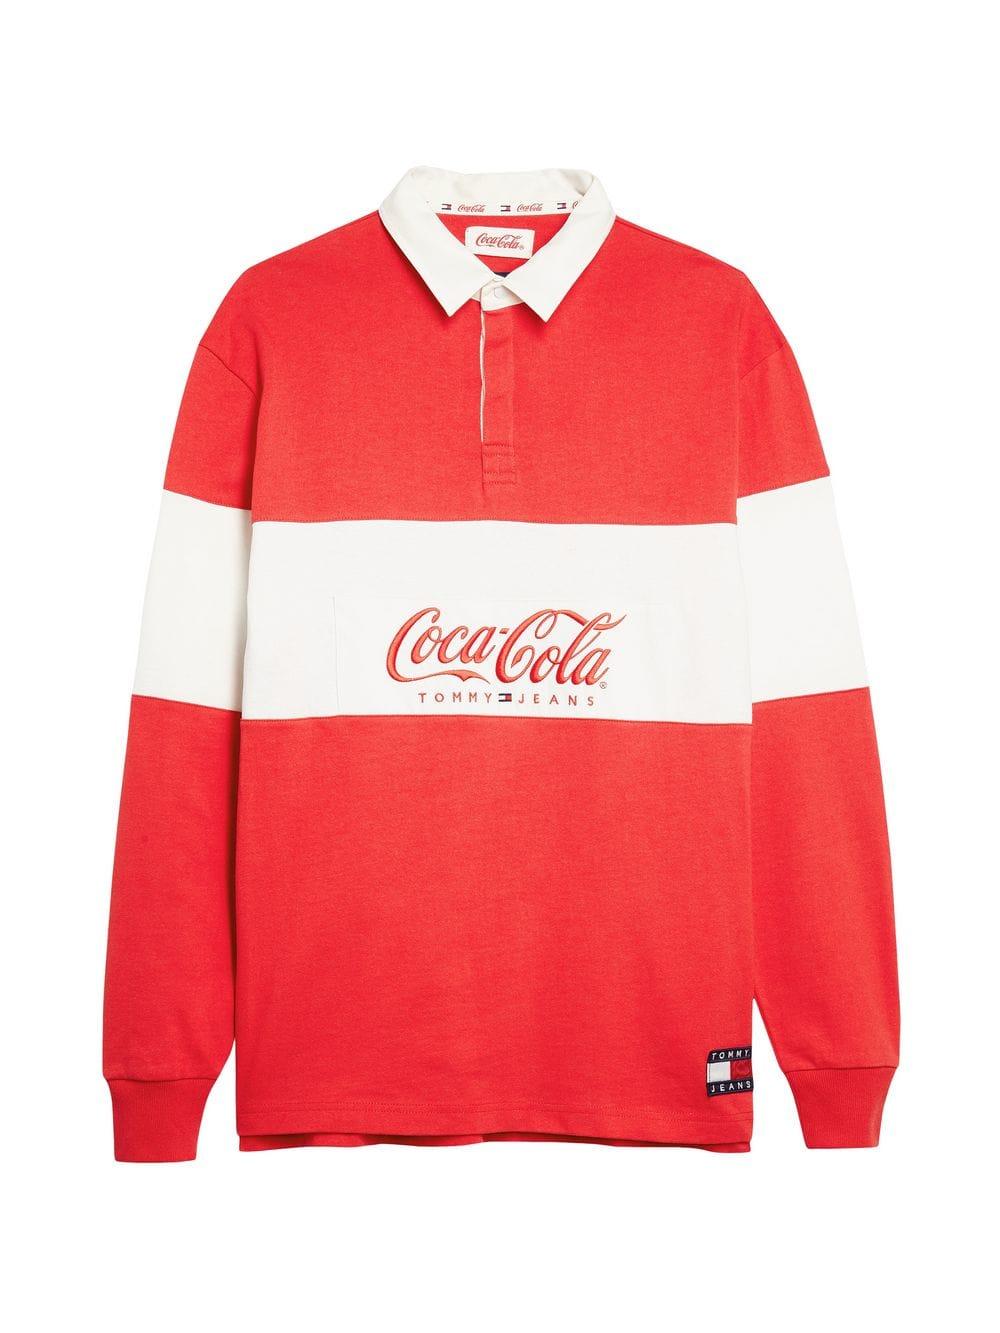 tommy hilfiger coca cola rugby shirt